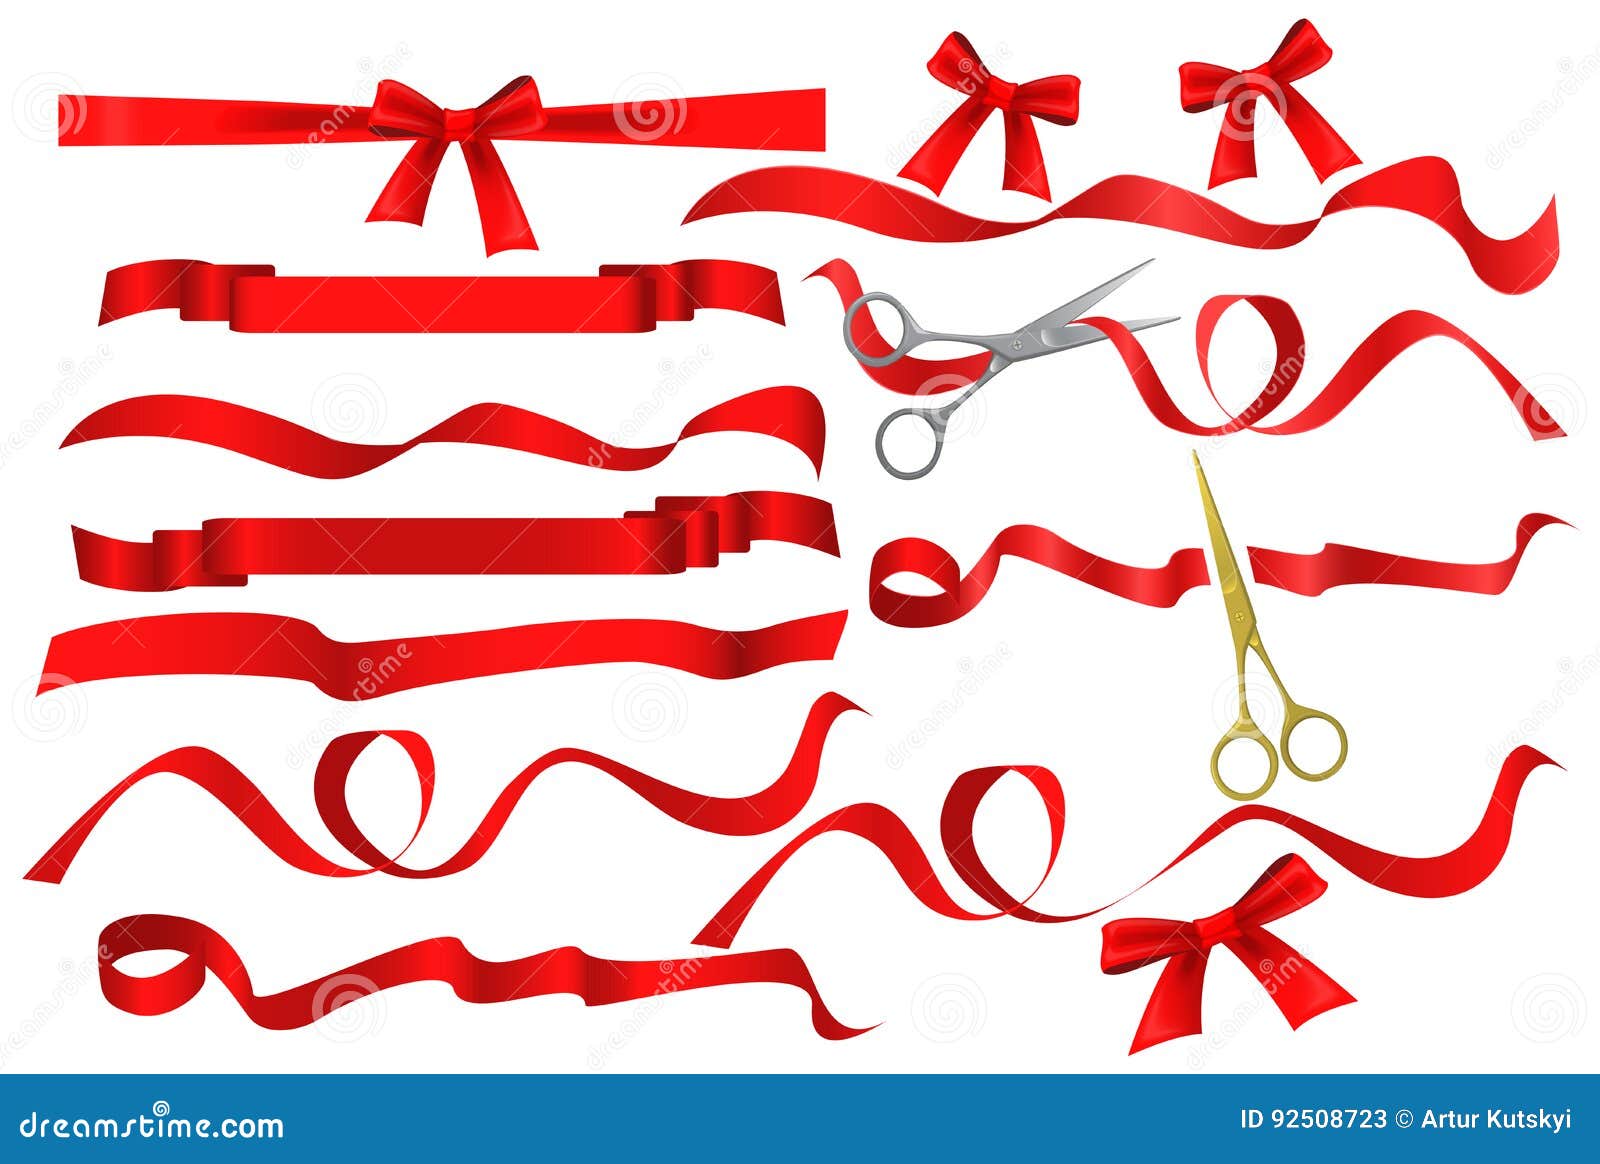 metal chrome and golden scissors cutting red silk ribbon. realistic opening ceremony s tapes ribbons and scissors